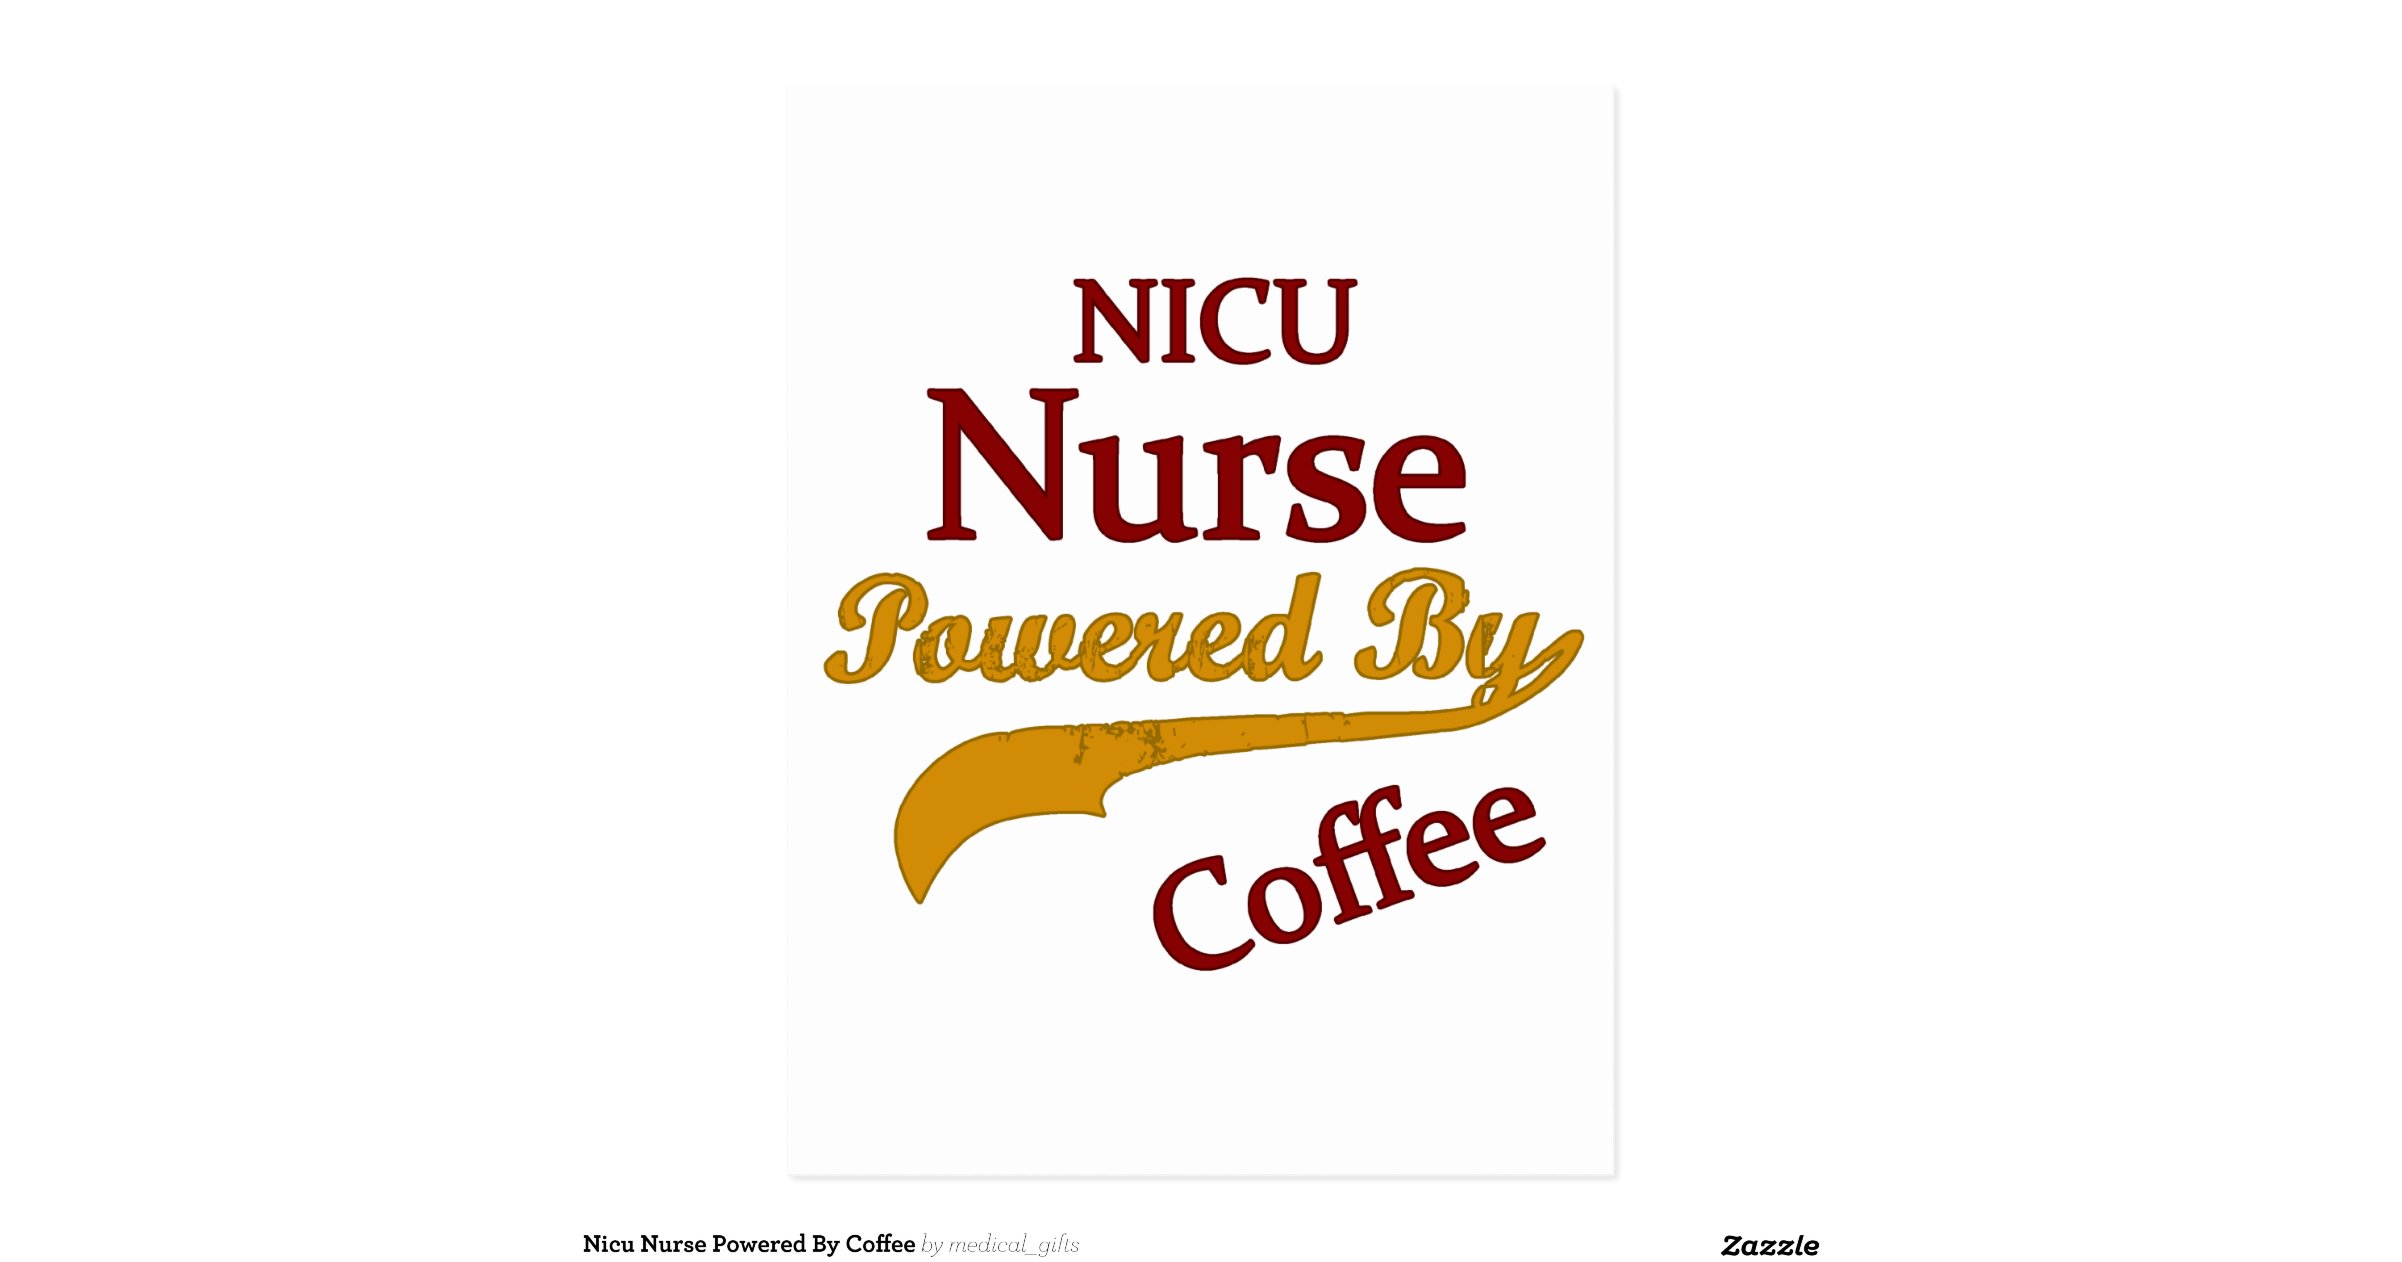 nicu's clipart collection - photo #47